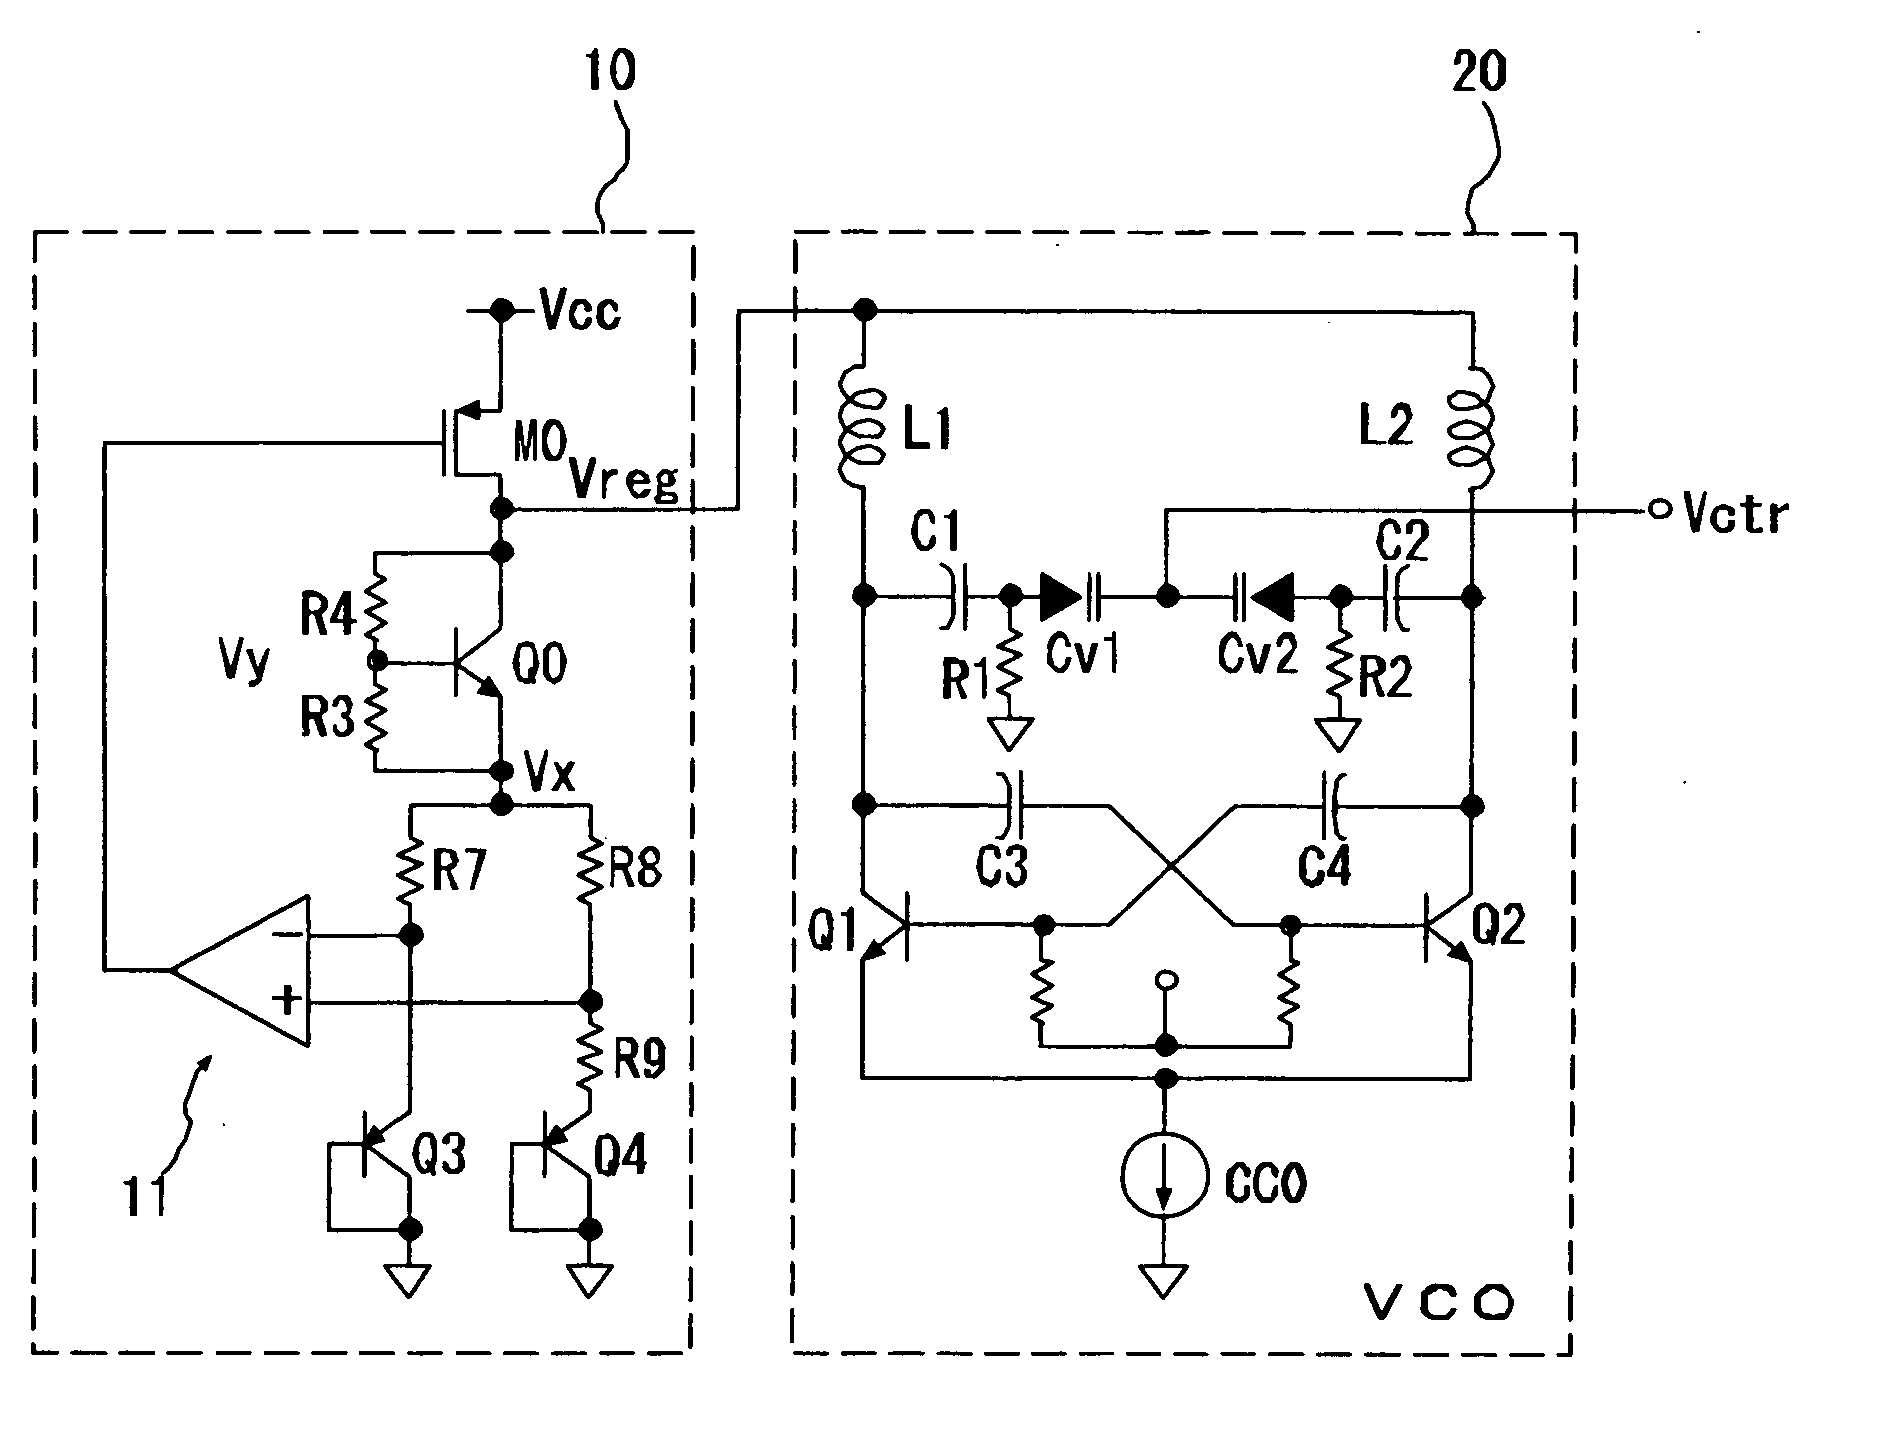 Embedded structure circuit for VCO and regulator